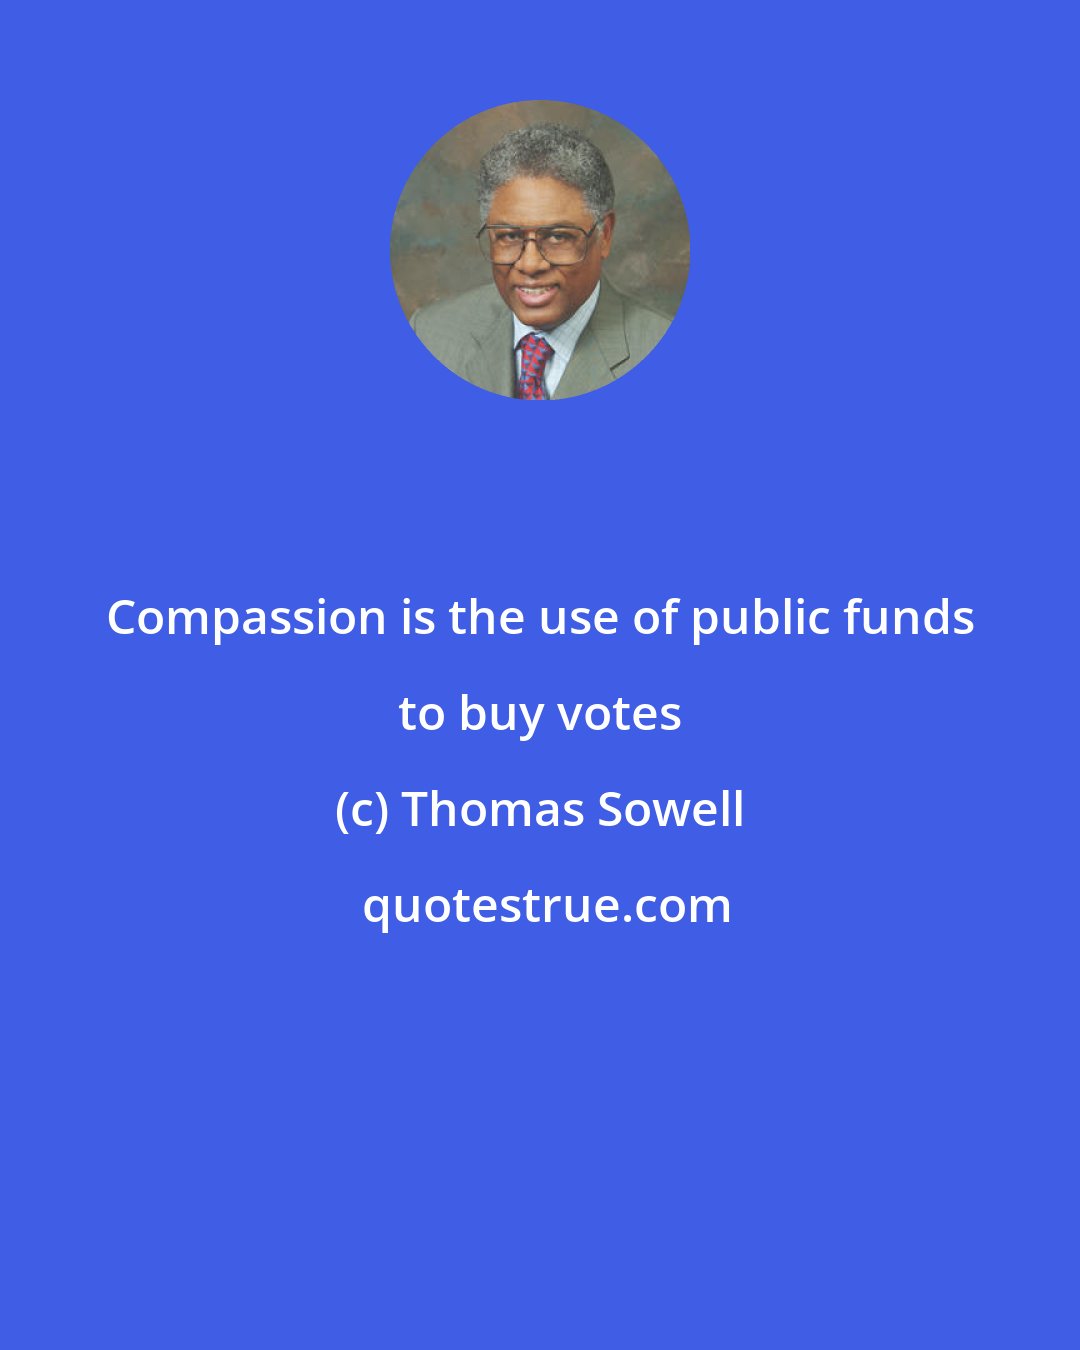 Thomas Sowell: Compassion is the use of public funds to buy votes